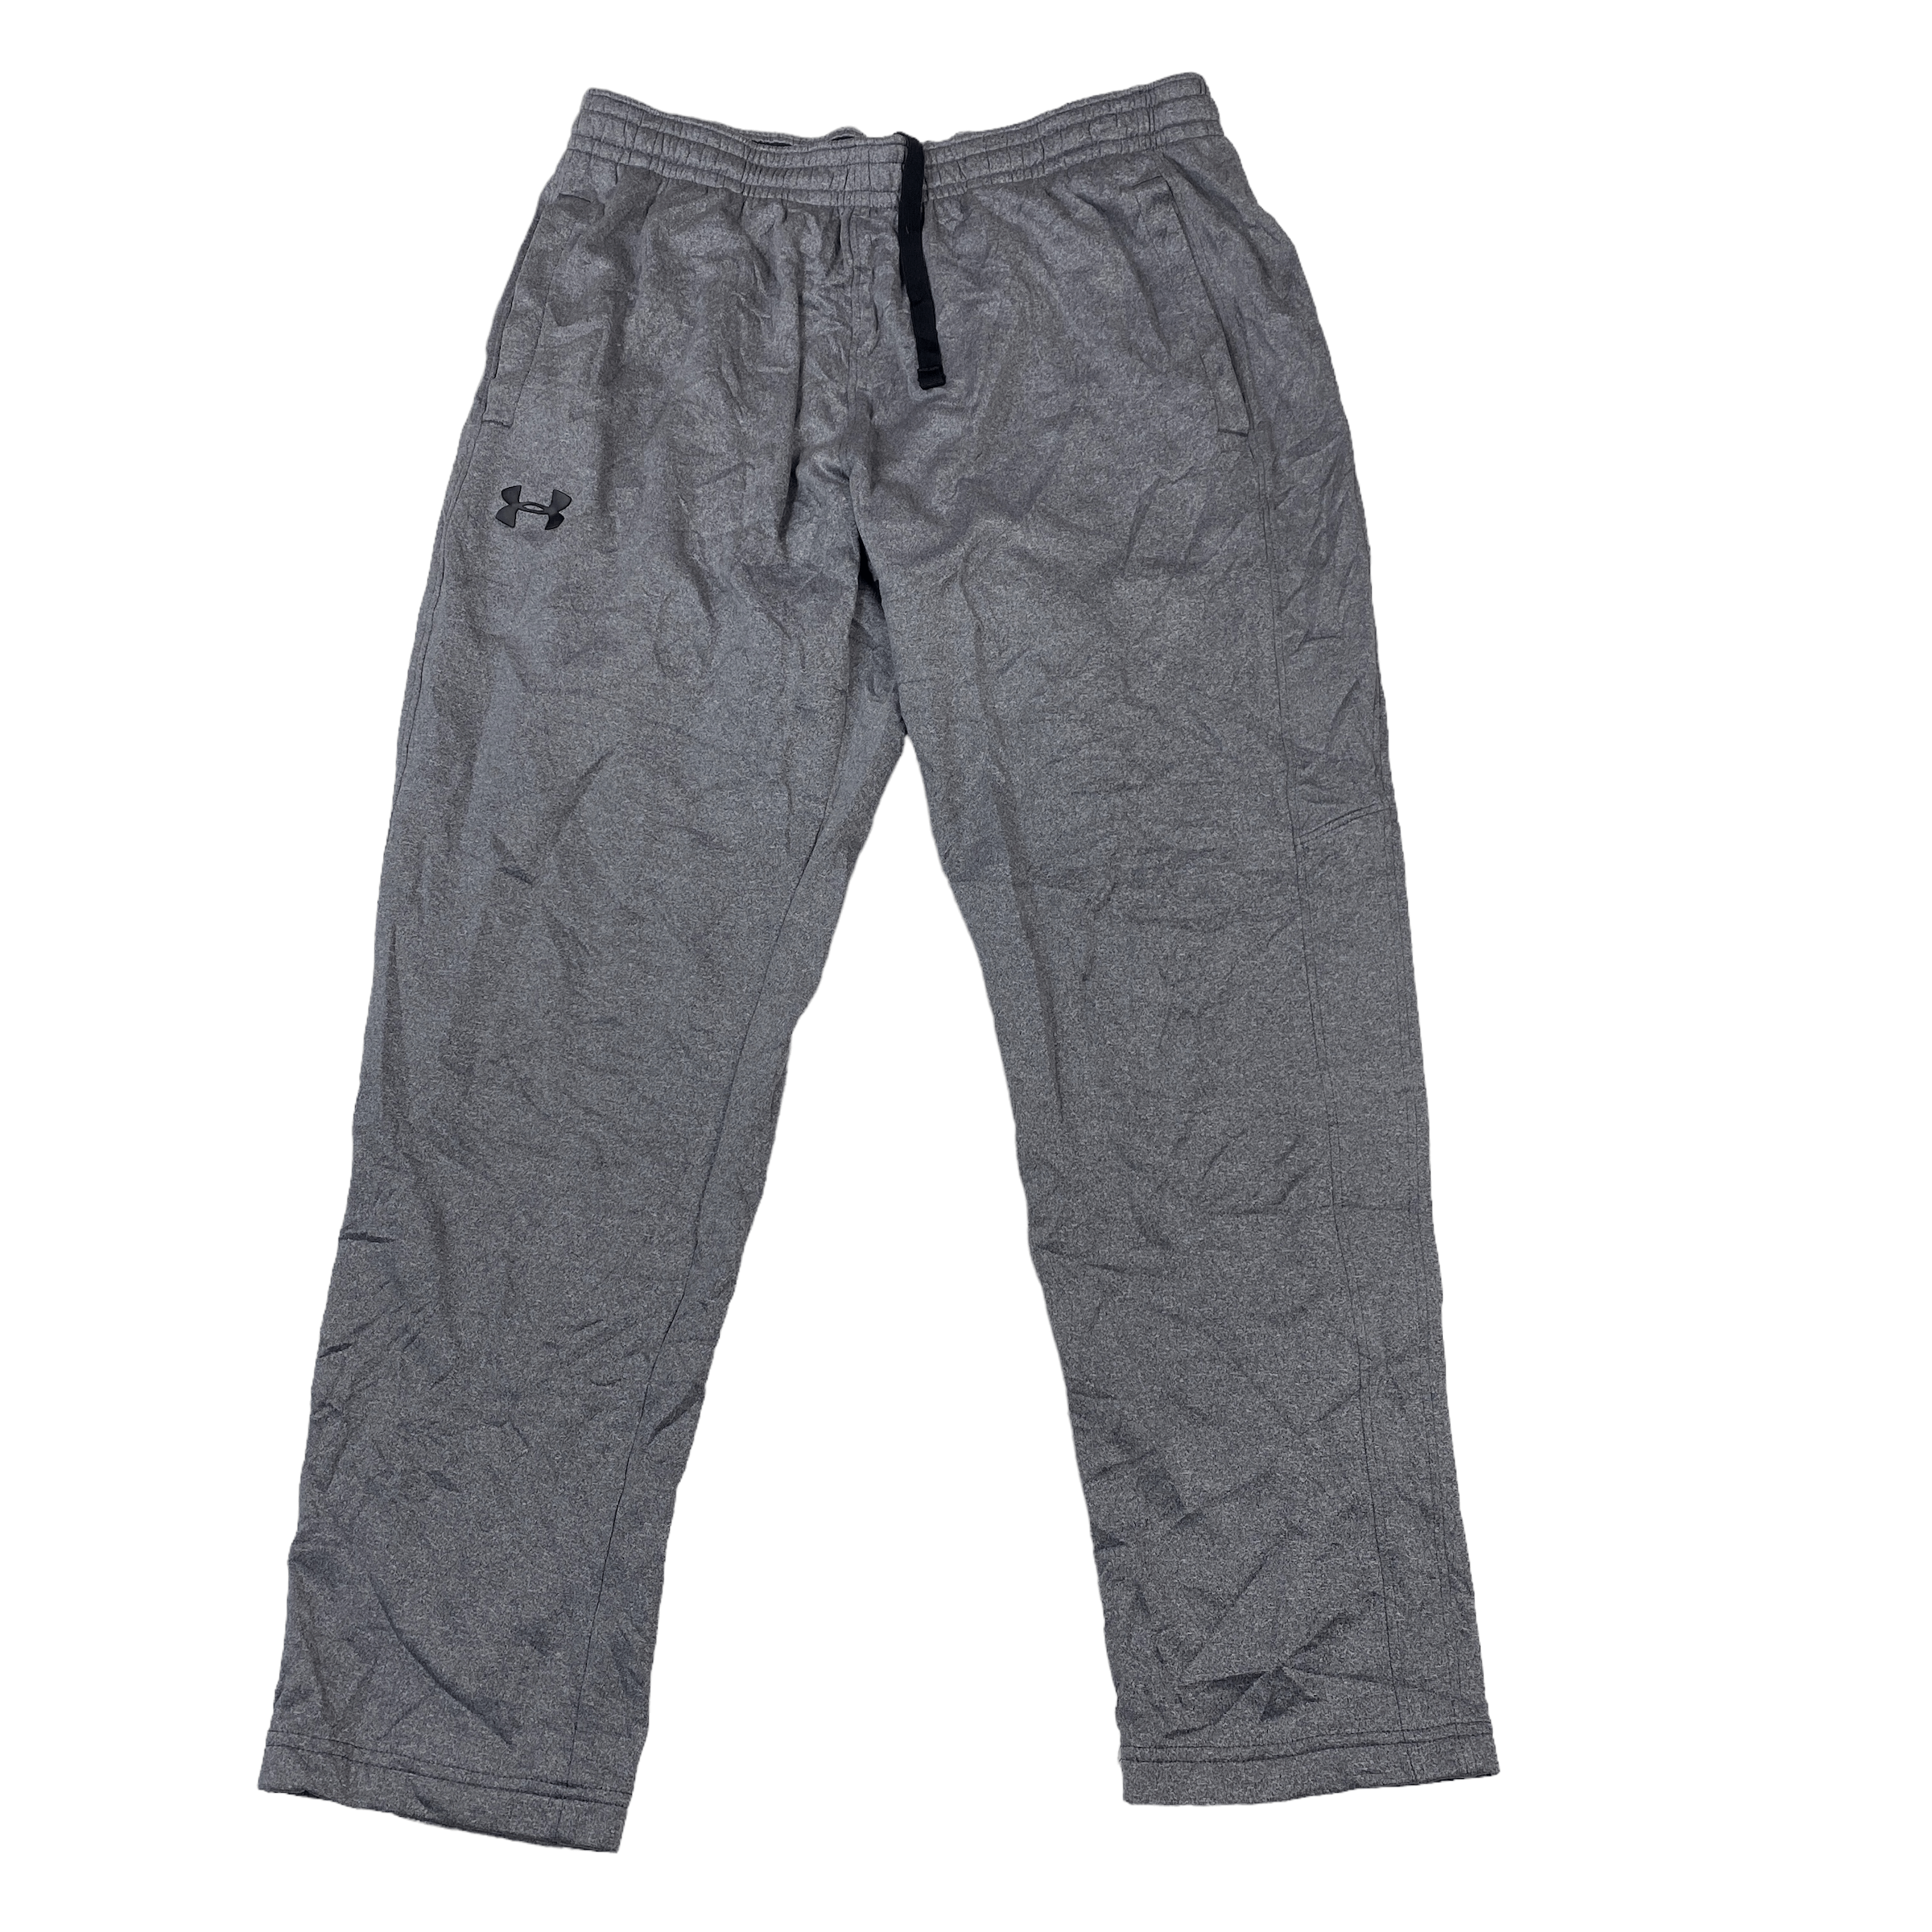 UNDER ARMOUR GREY TRACK PANTS Awevintageclothing, 59% OFF